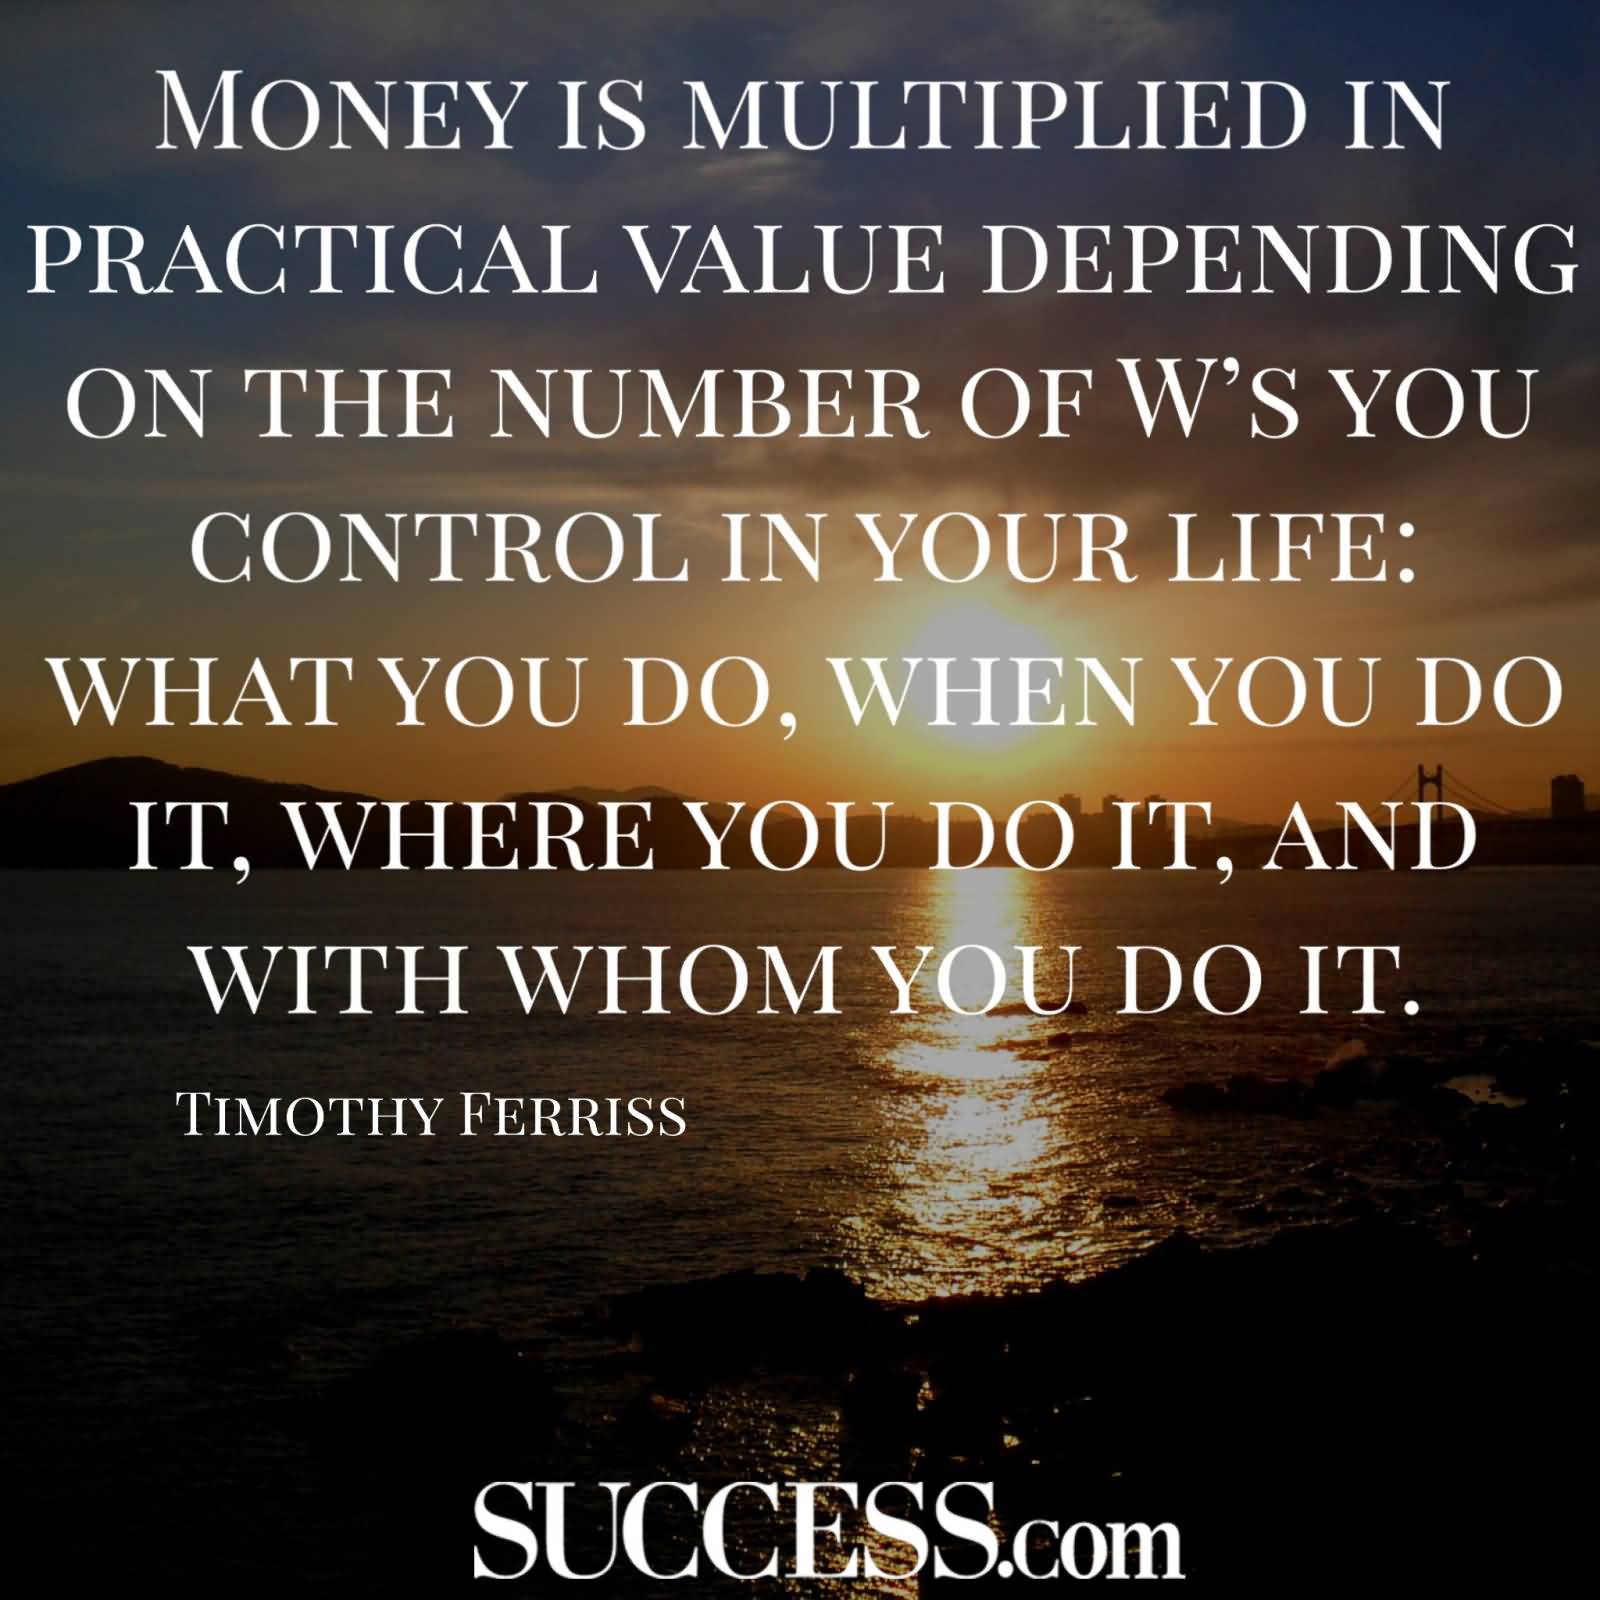 Money is multiplied in practical value depending on the number of W's you control in your life what you do, when you do it, where you ... Timothy Ferriss